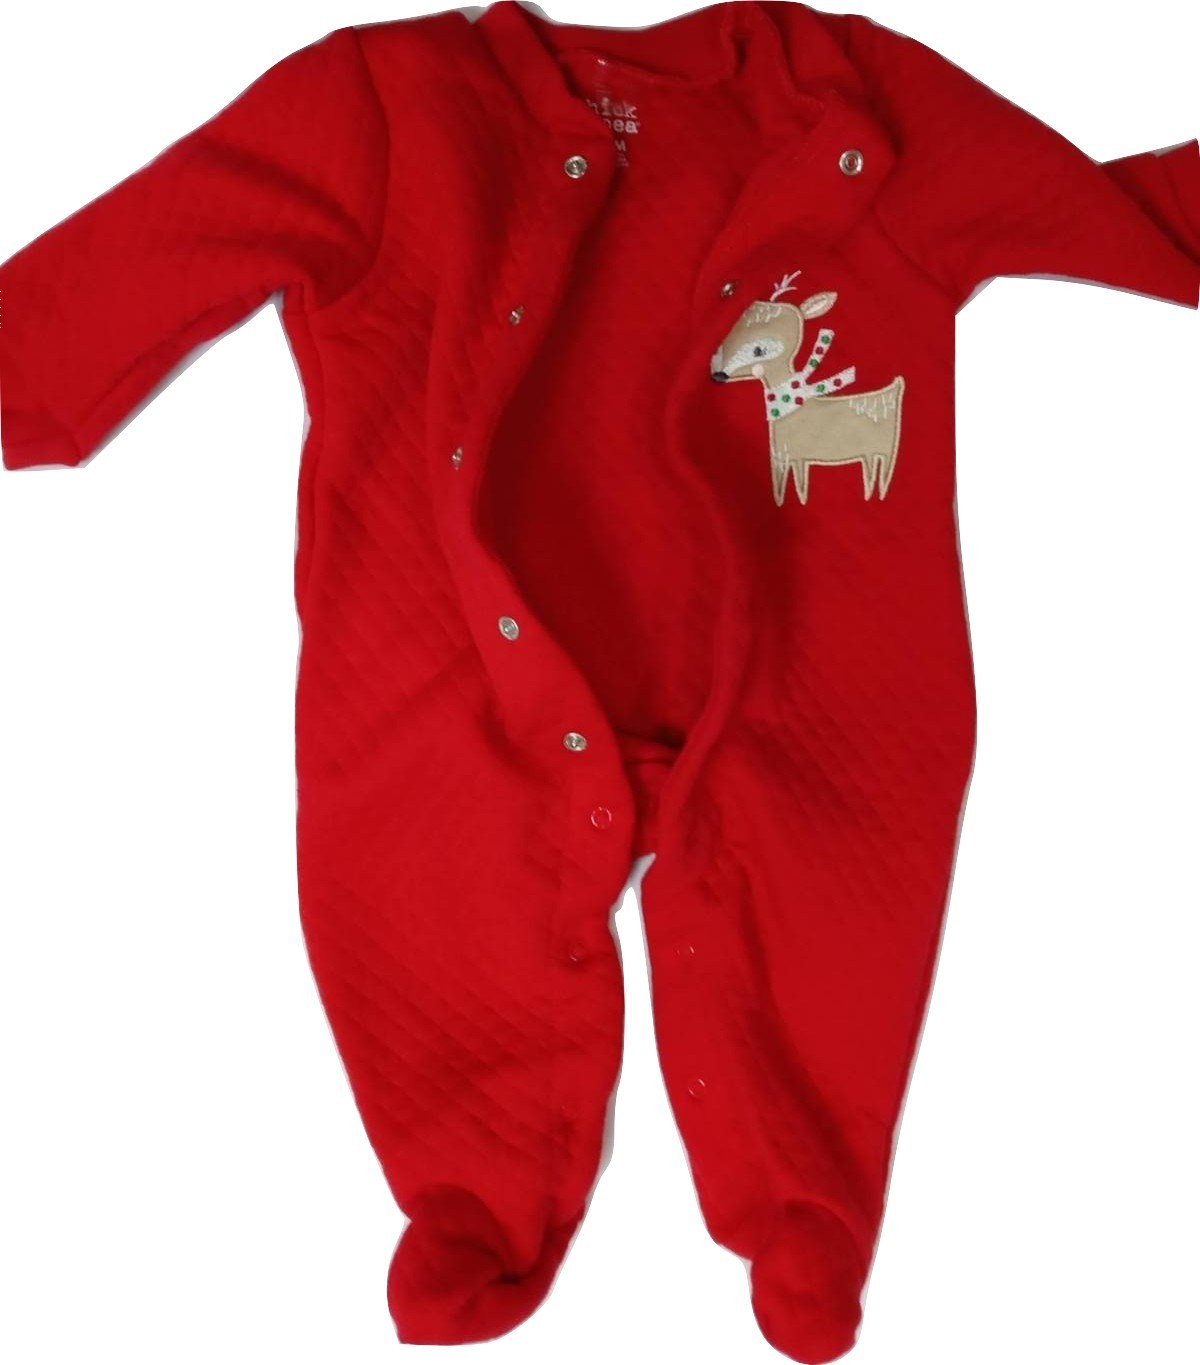 INFANT BABY WARM 1 PIECE RED SUIT REINDEER EMBROIDERY CHRISTMAS SCARF SIZE 0-3M